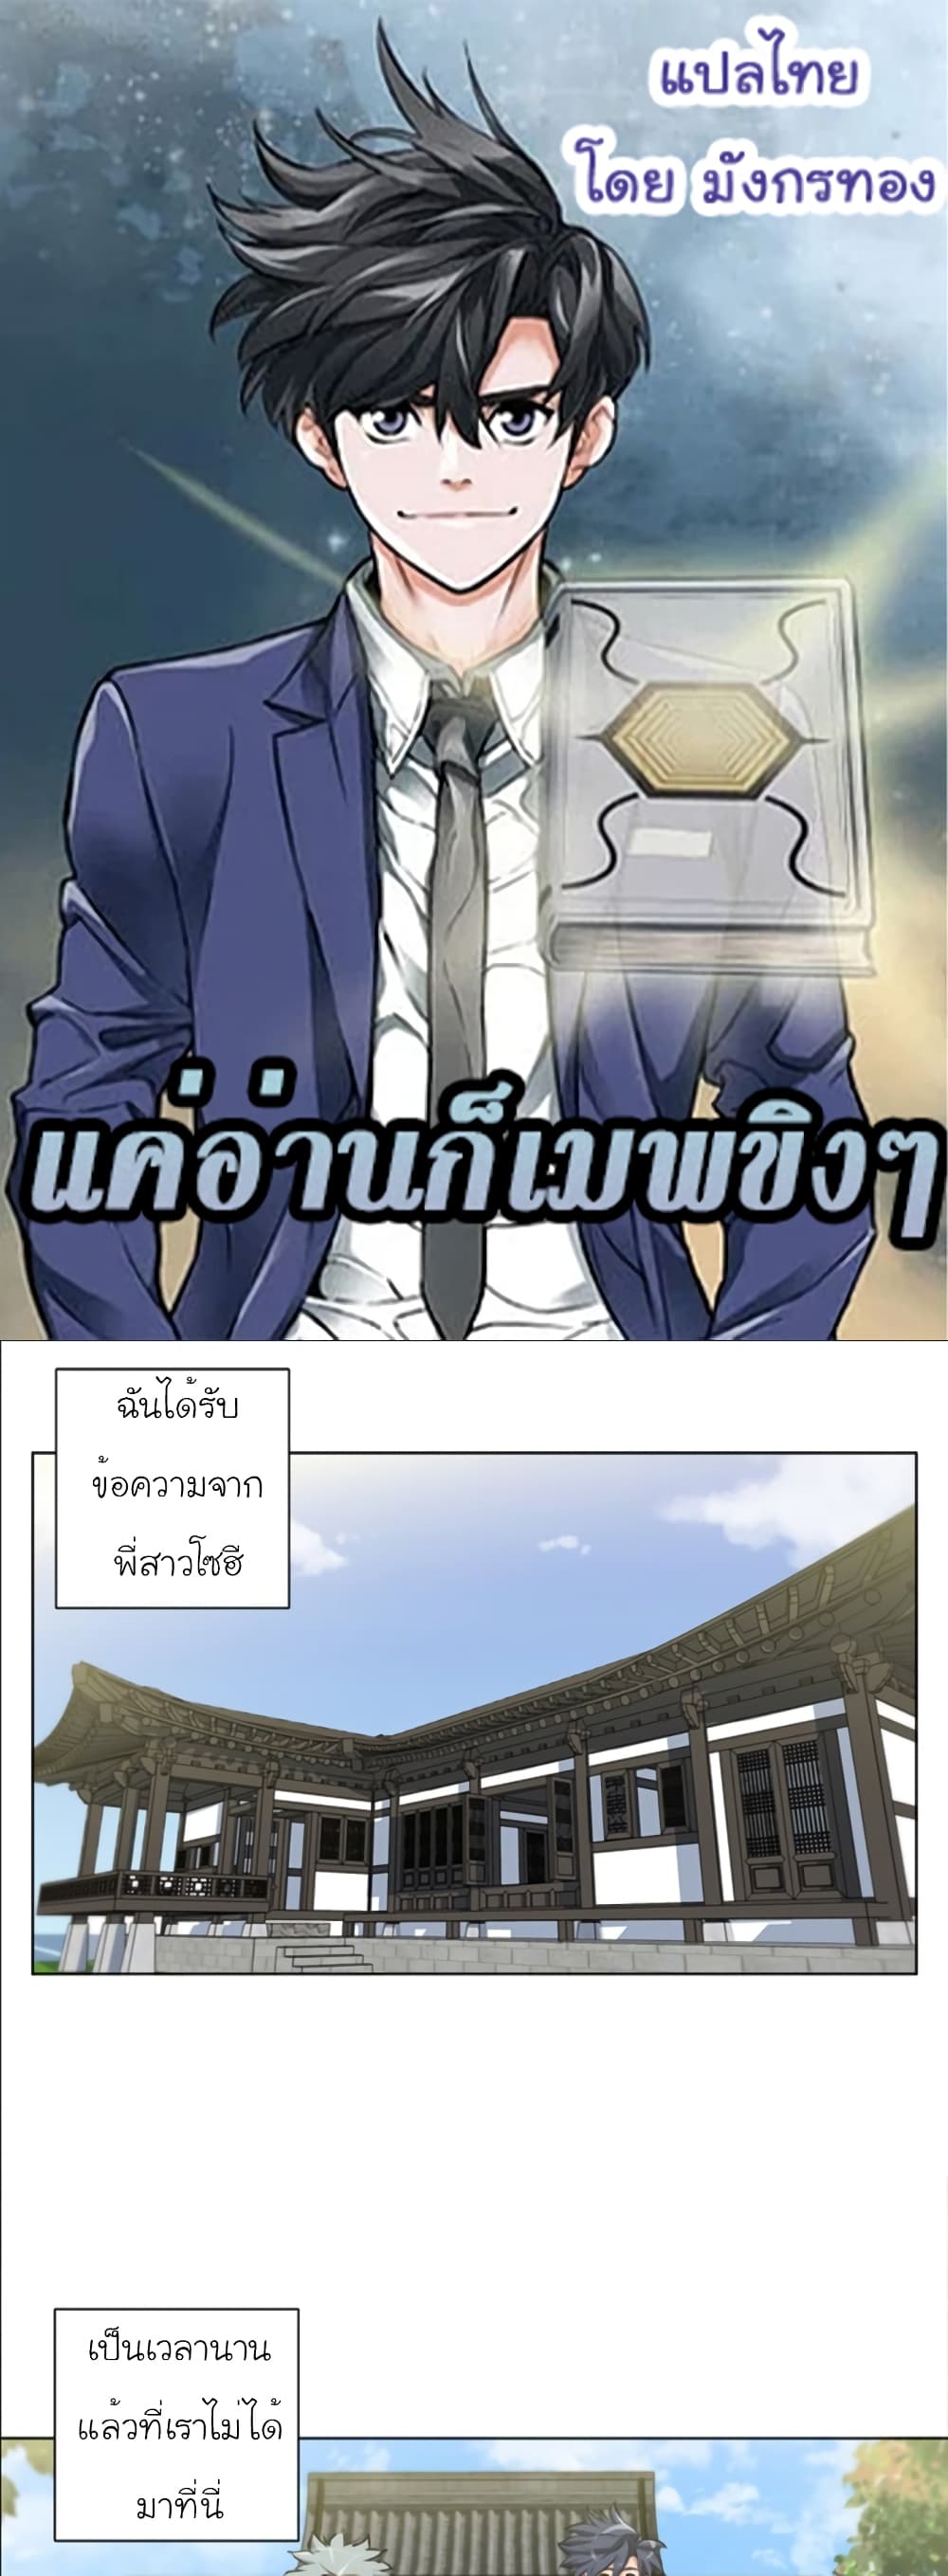 I Stack Experience Through Reading Books ตอนที่ 52 (1)